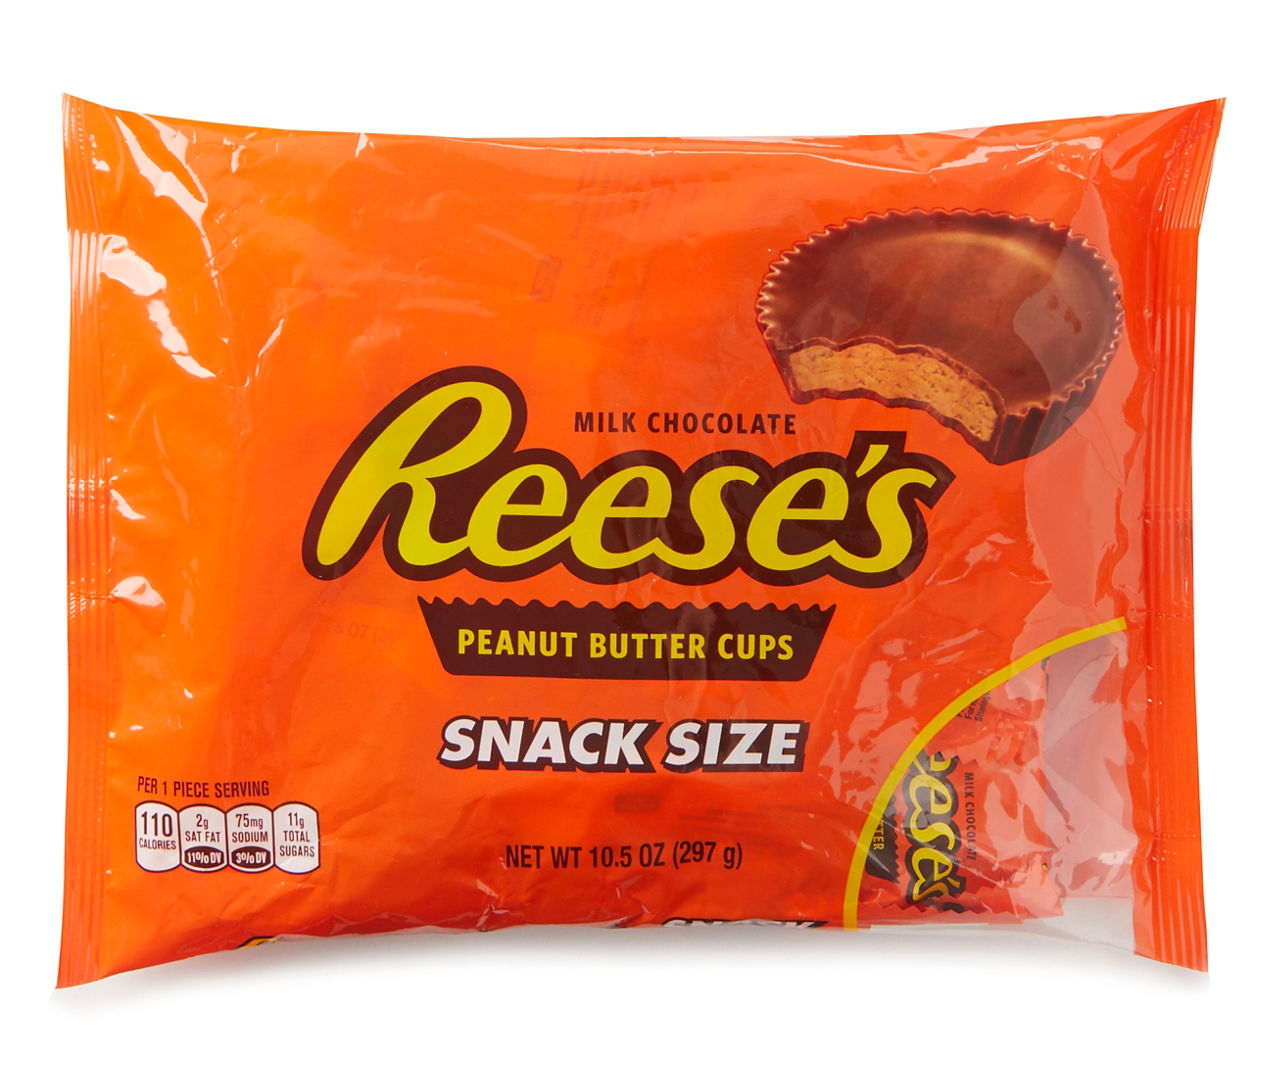 Reese's Snack Size Peanut Butter Cups, 10.5 Oz.